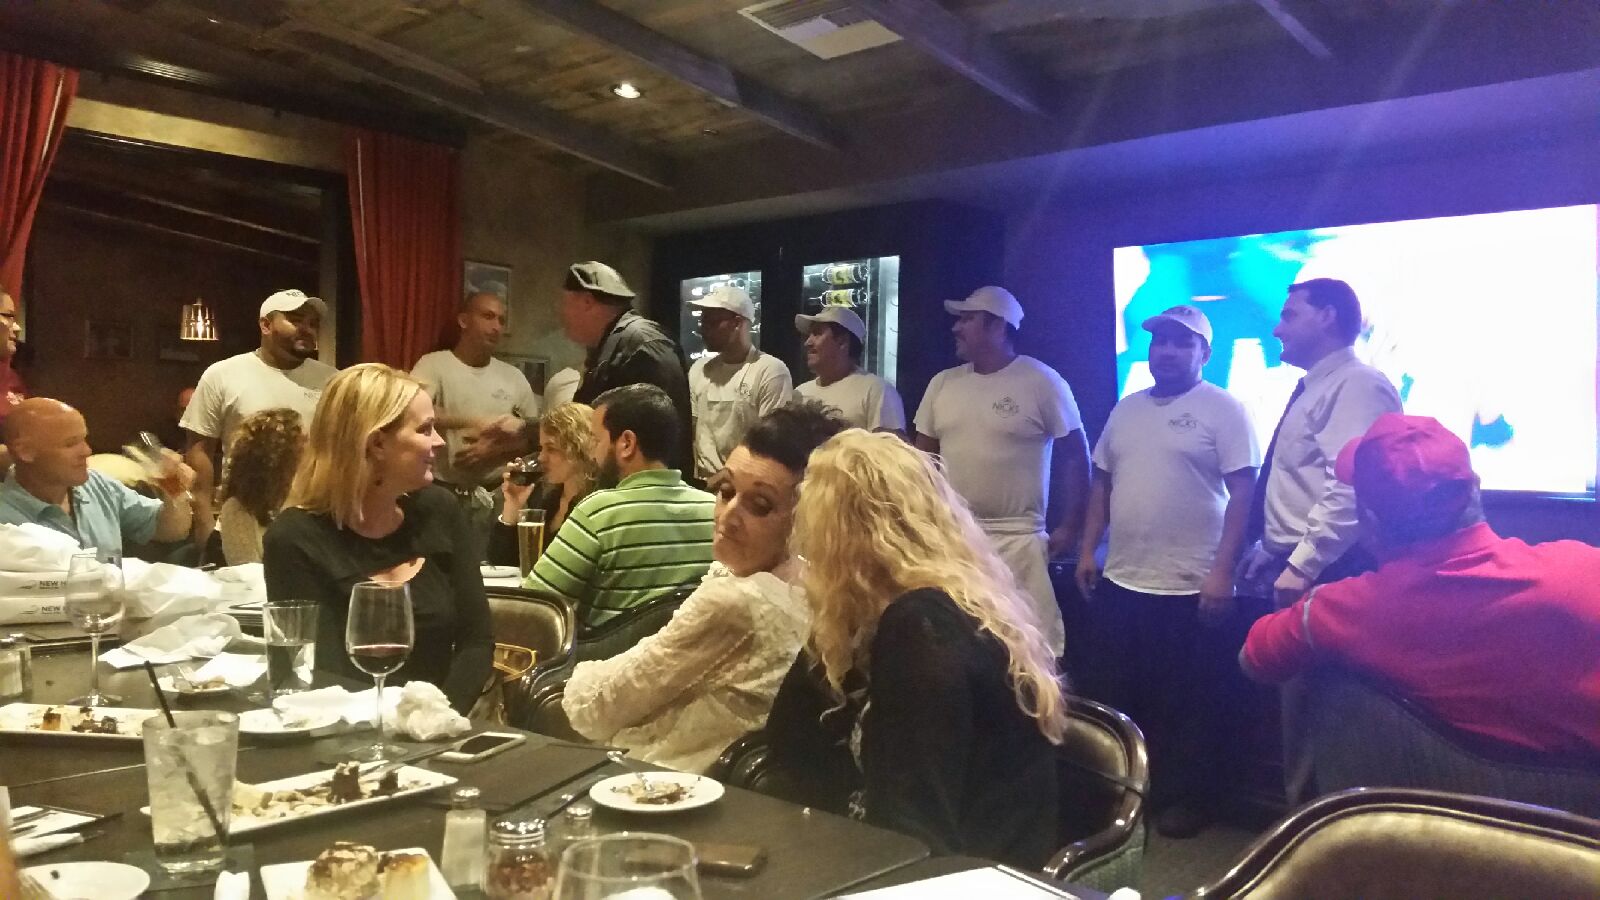 The Nick's cooks, manager, servers and dishwashers getting a round of applause after the meal. Great job! 